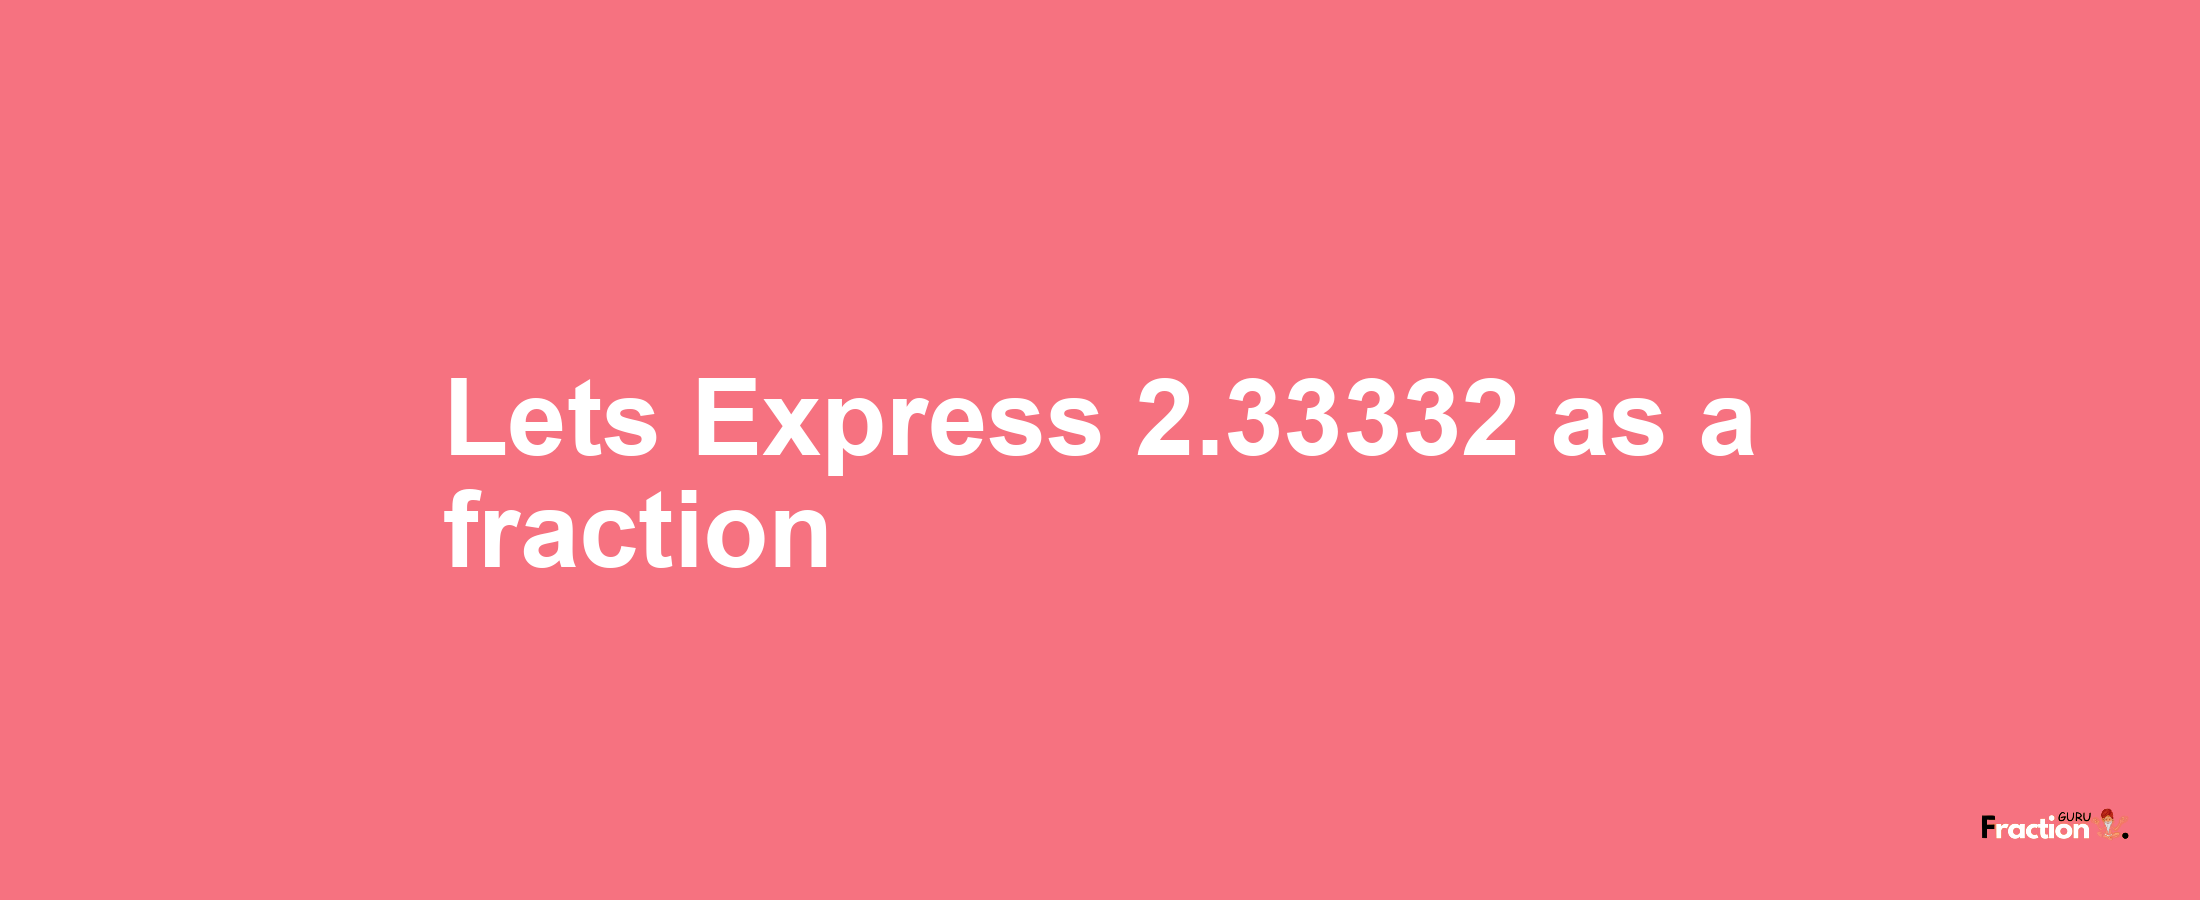 Lets Express 2.33332 as afraction